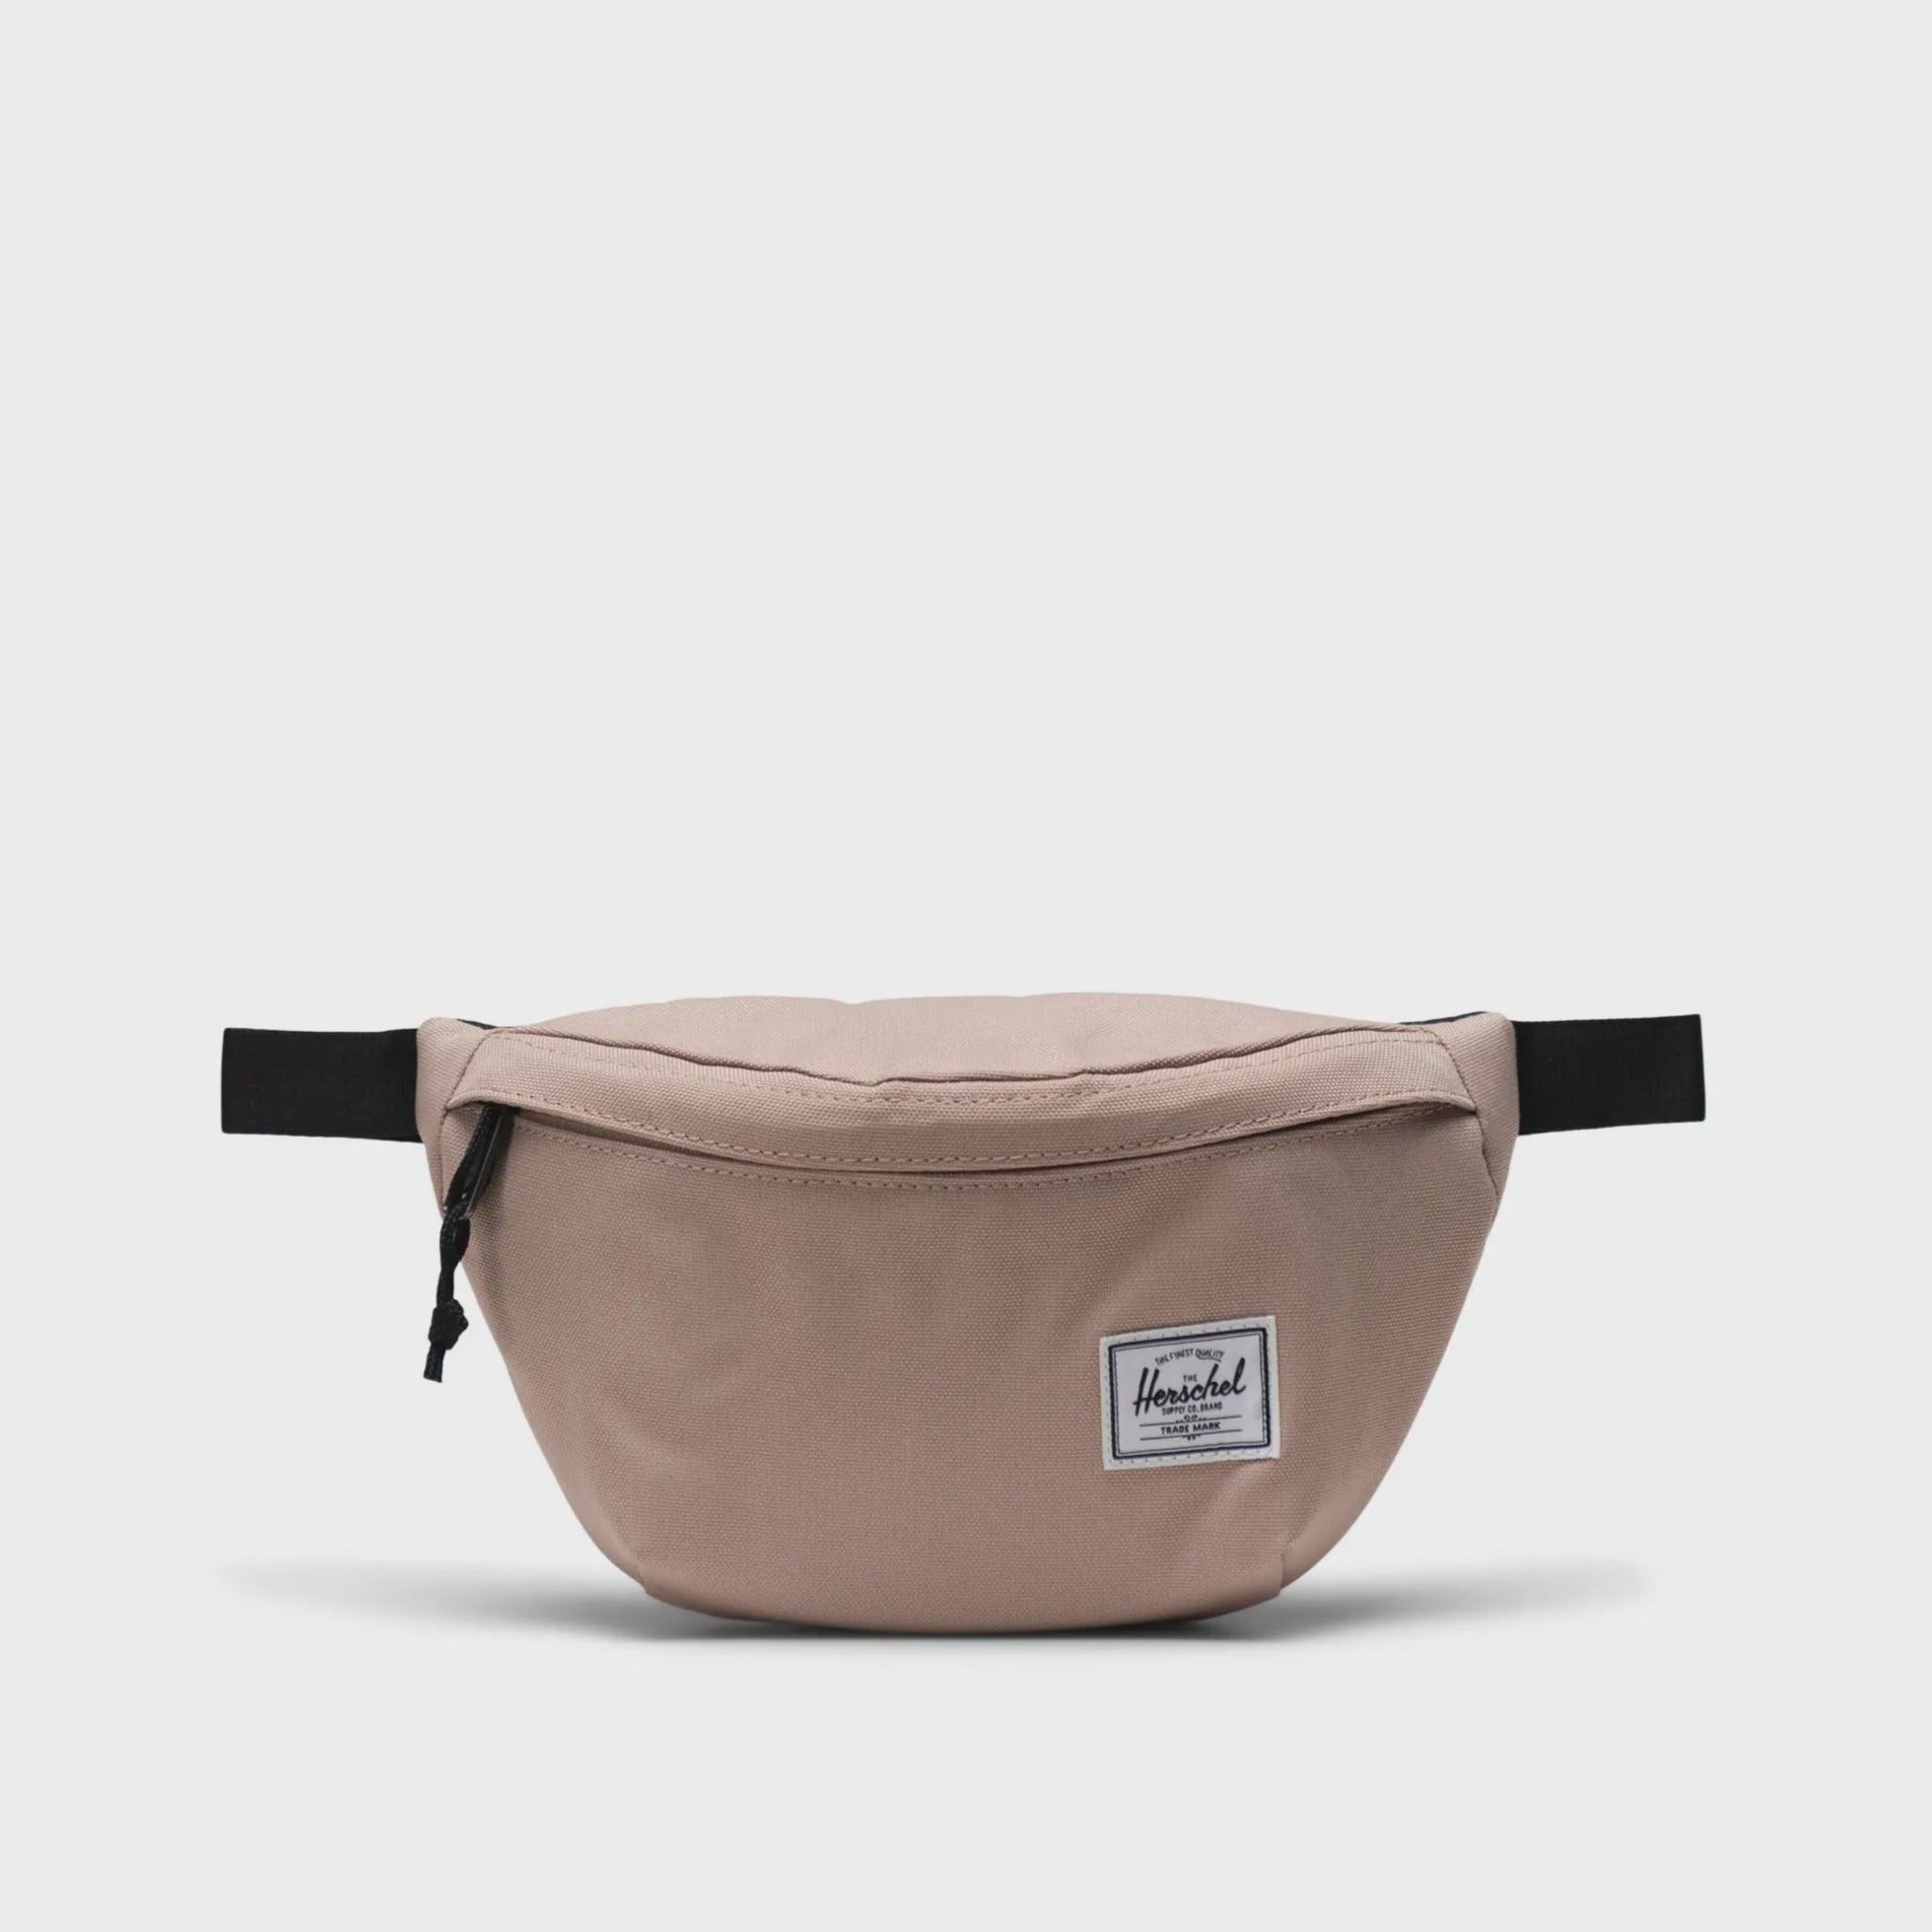 HERSCHEL - CLASSIC HIP PACK IN LIGHT TAUPE